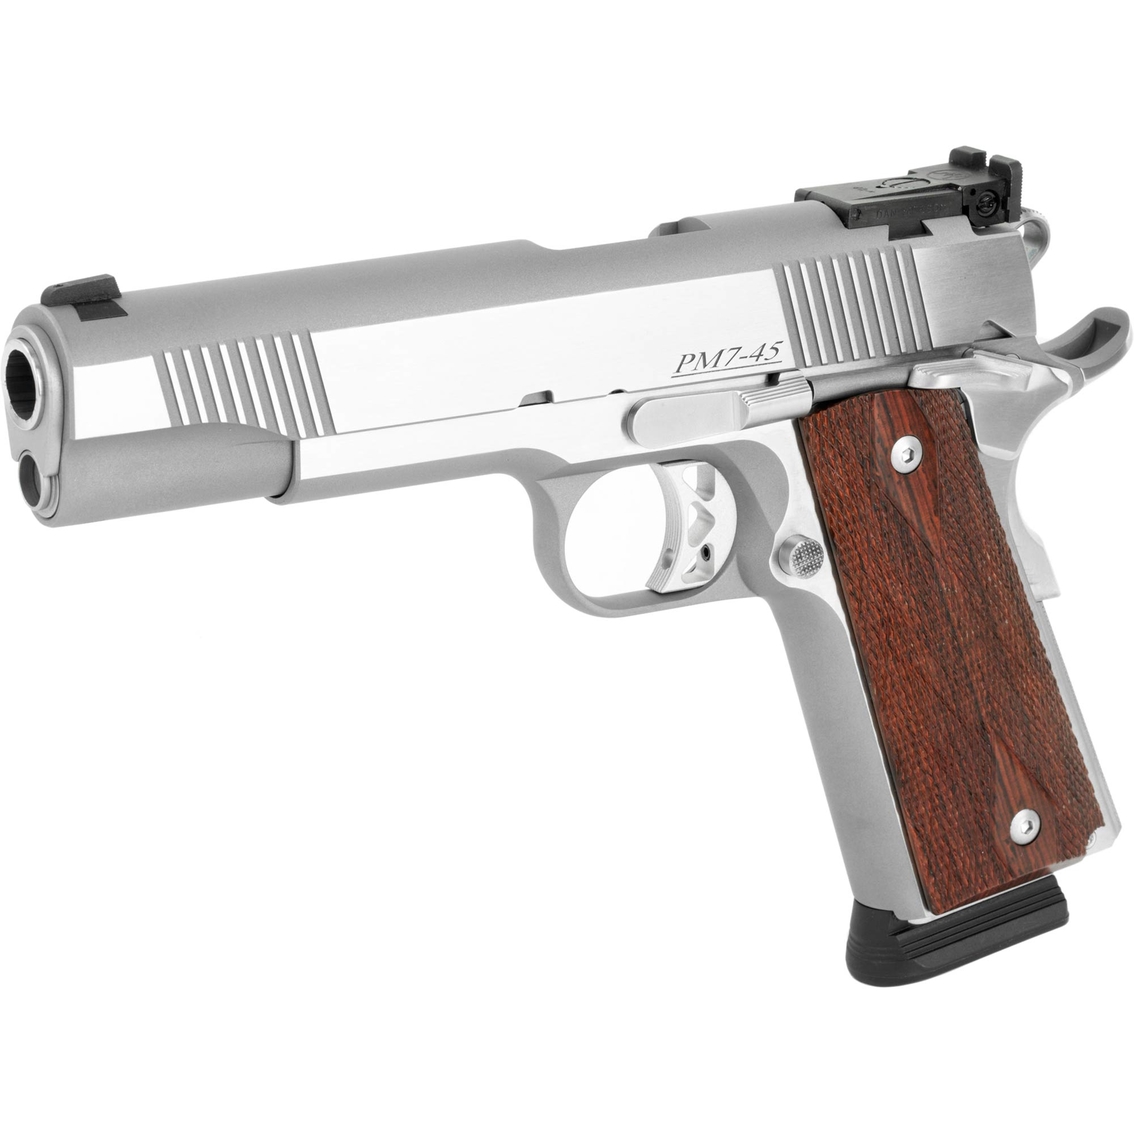 Dan Wesson Pointman Seven 45 ACP 5 in. Barrel 8 Rds 2-Mags Pistol Stainless Steel - Image 3 of 3